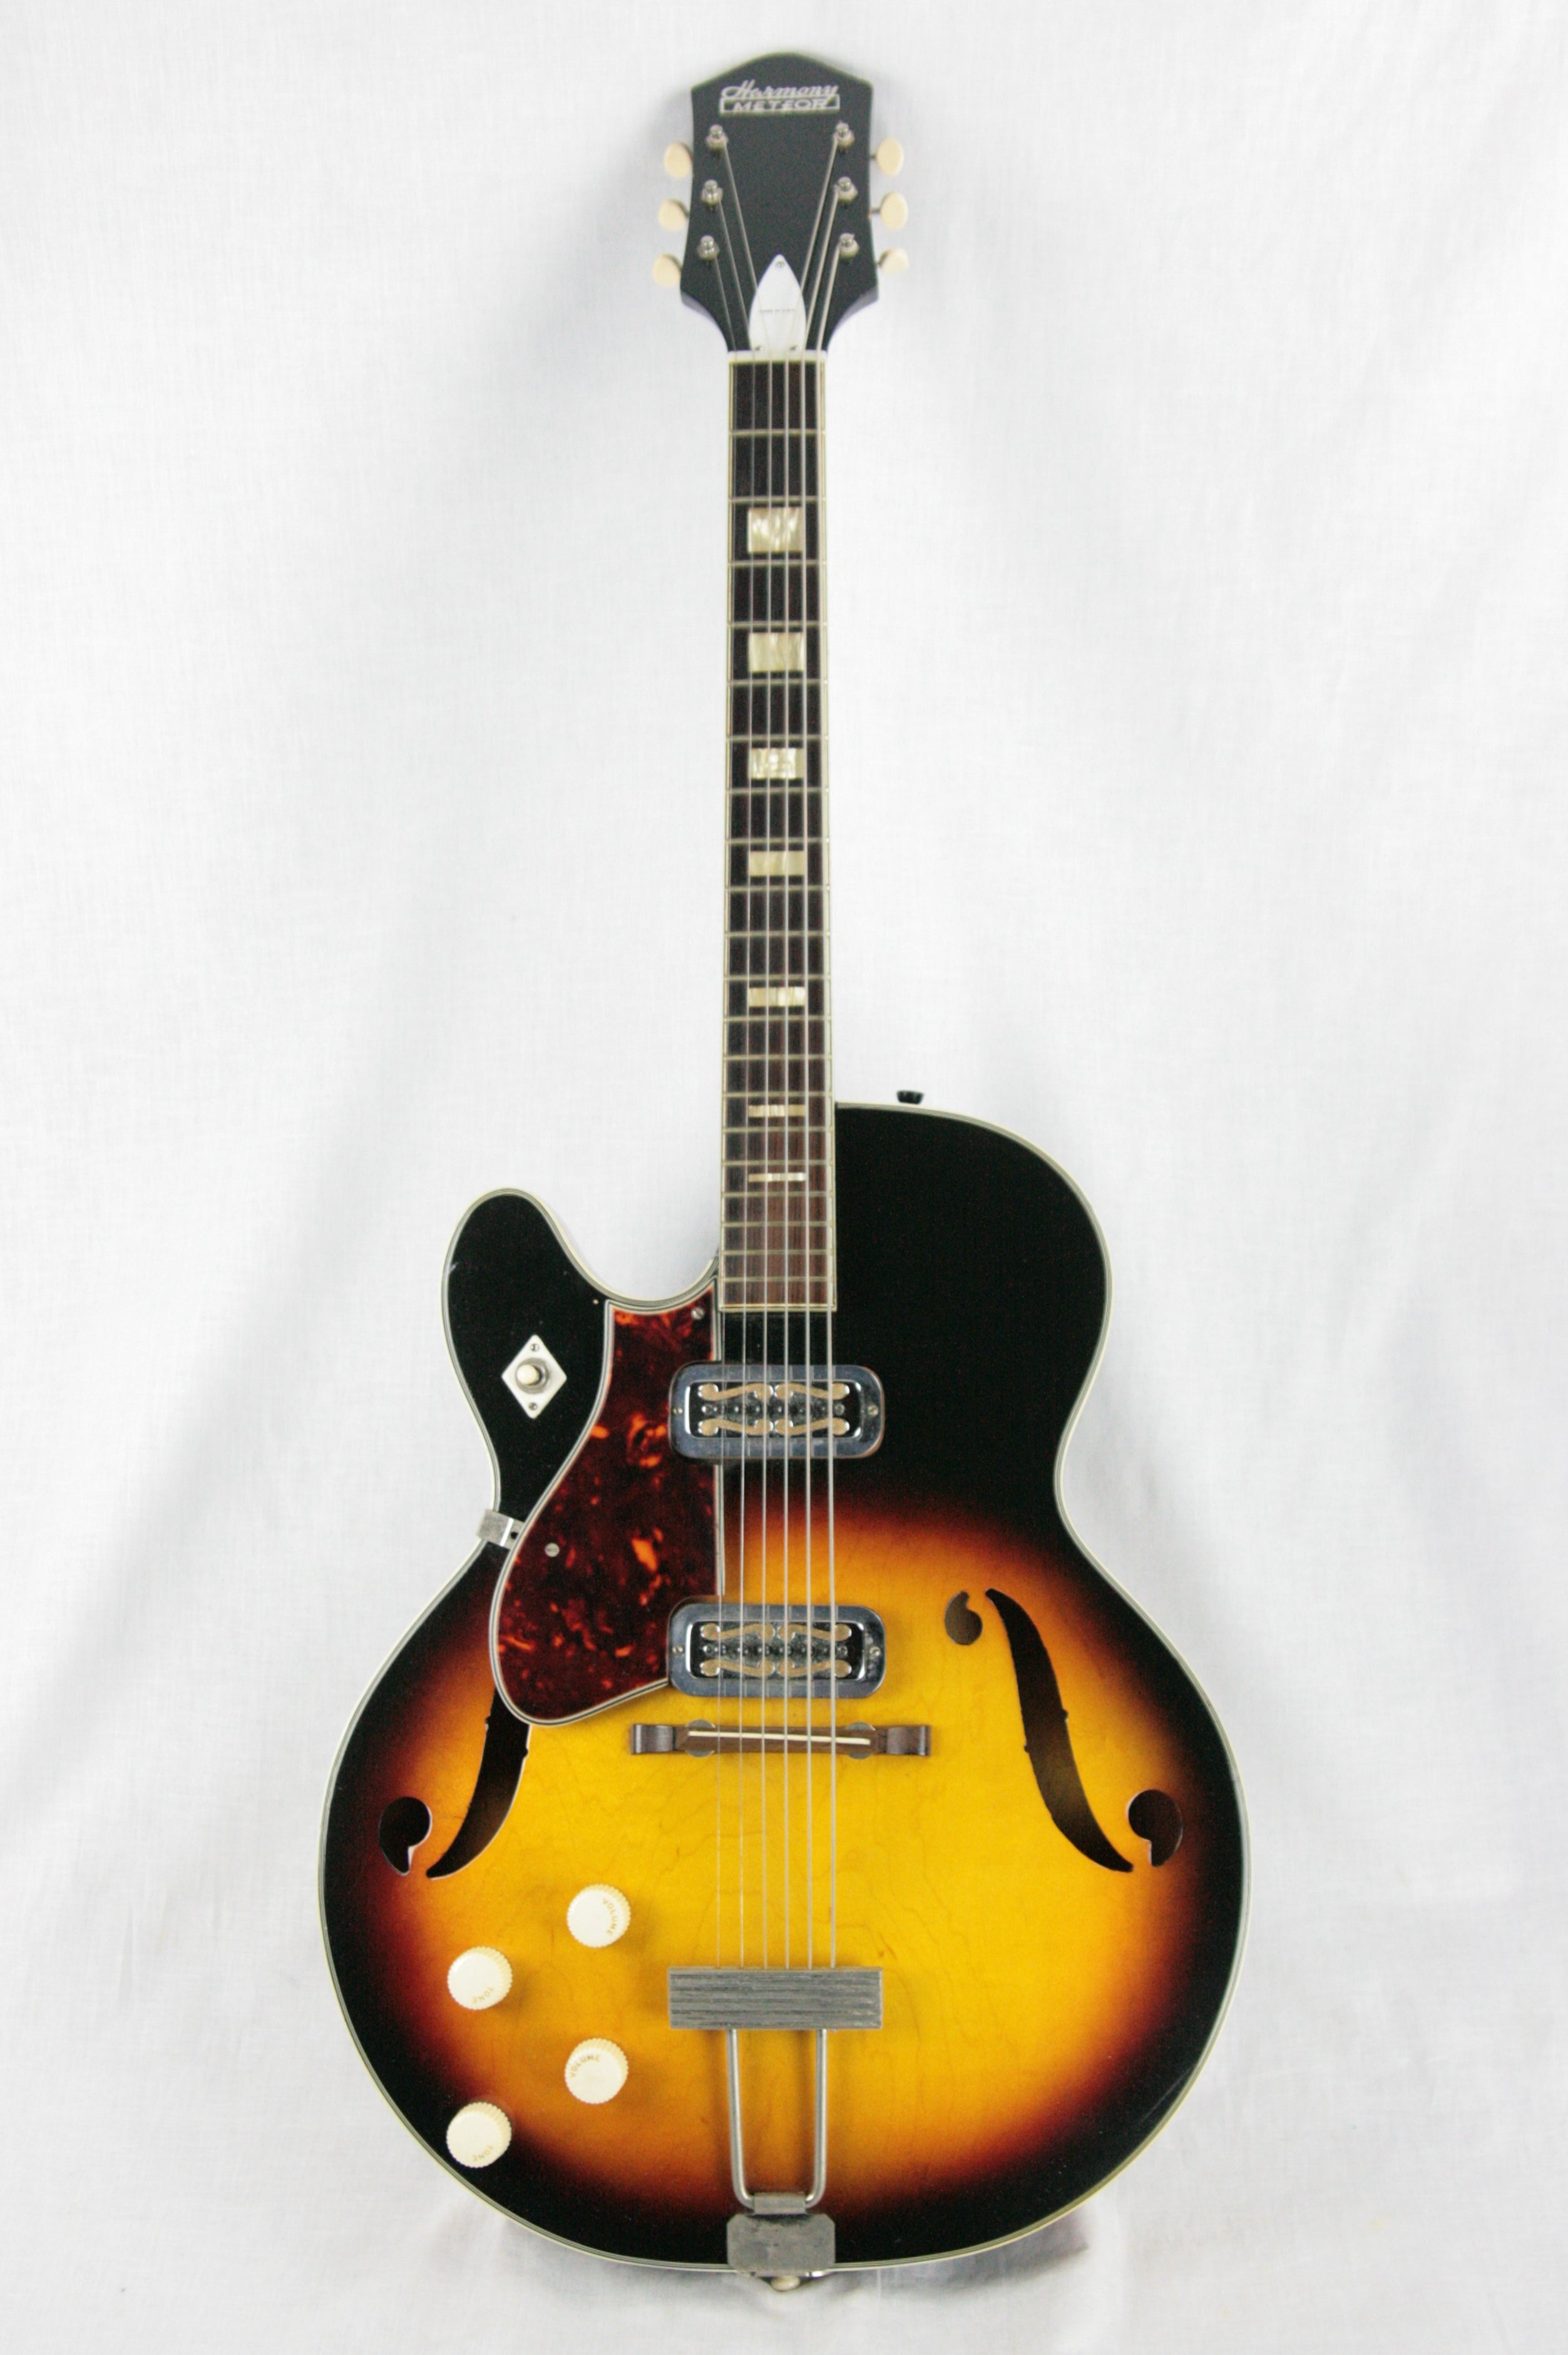 *SOLD*  c 1960 Harmony H-70 Meteor LEFT-HANDED Guitar! Vintage Hollowbody! Keith Richards